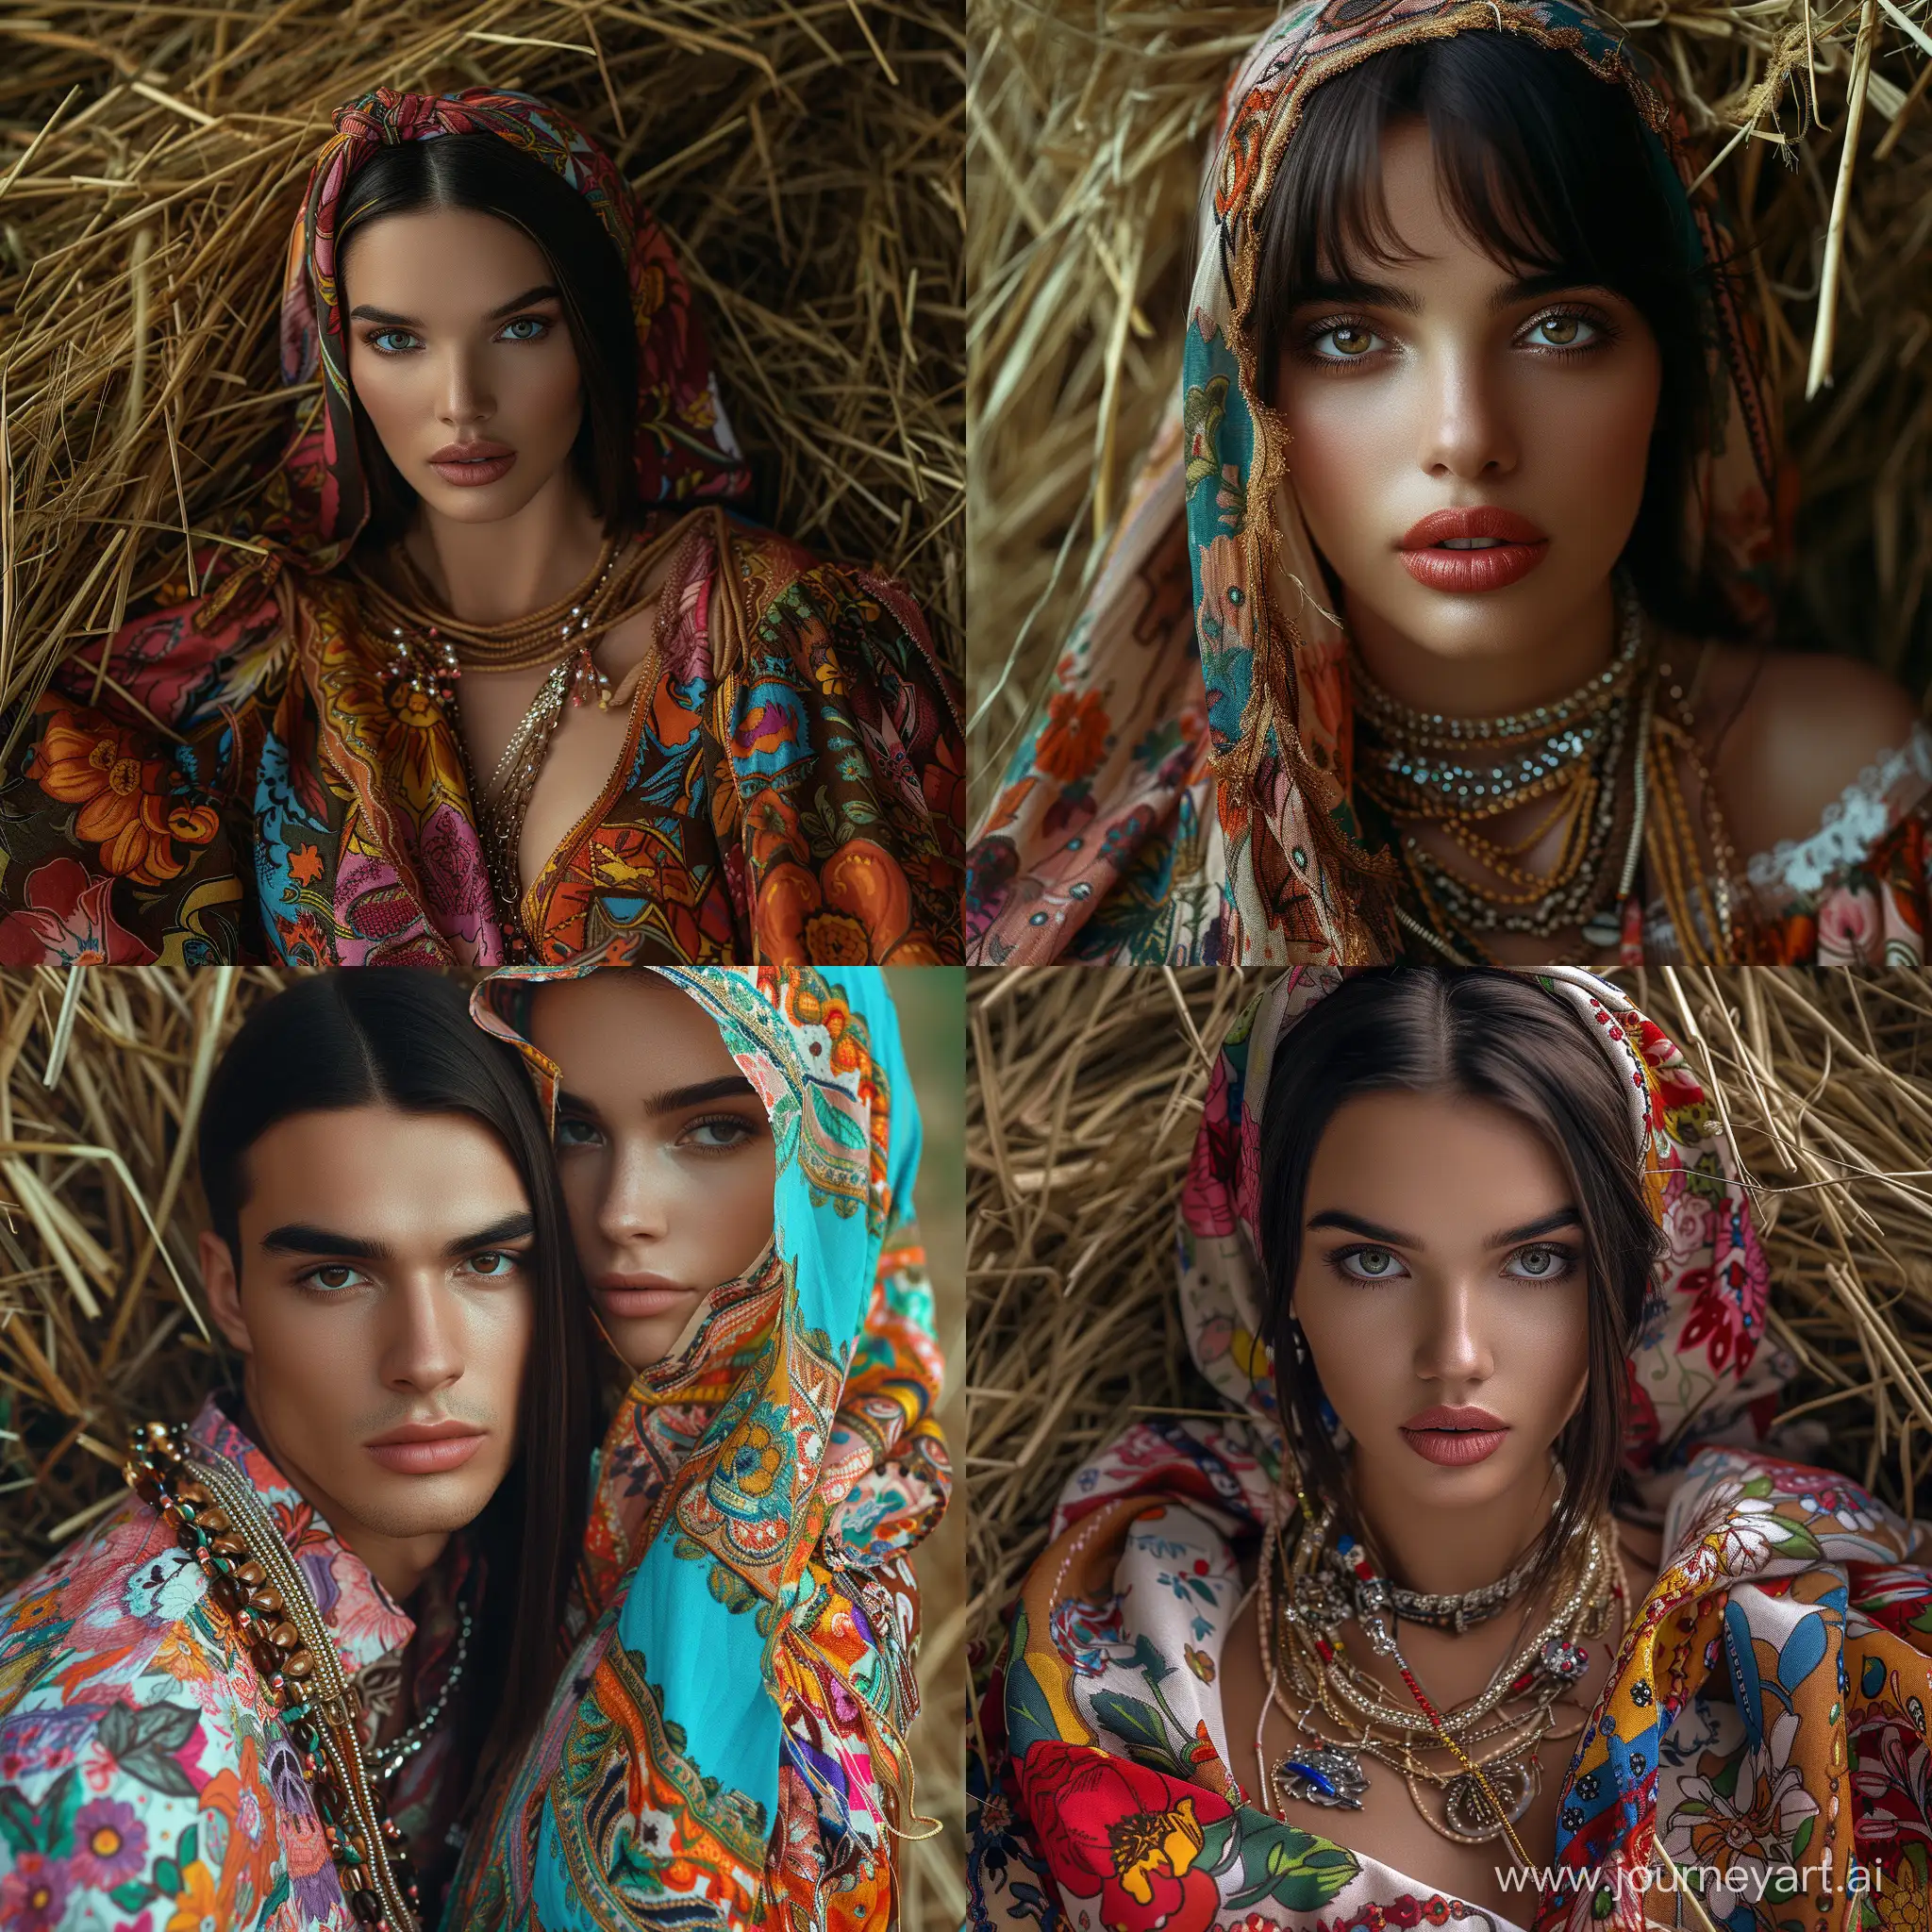 Beautiful woman, handsome man, beautiful eyes, sensual lips, dark straight hair, beautiful figure, layered clothing, bright, bold prints, bright, stylish, lots of jewelry, accessories, monisto, headscarf, bright colors, flowers, hay, play of light and shadow, manipulated photography style, layered mixed technique, Edwin Weeks, professional photography, aesthetic, beautiful, realistic, ISO 2000, soft lighting, 4k